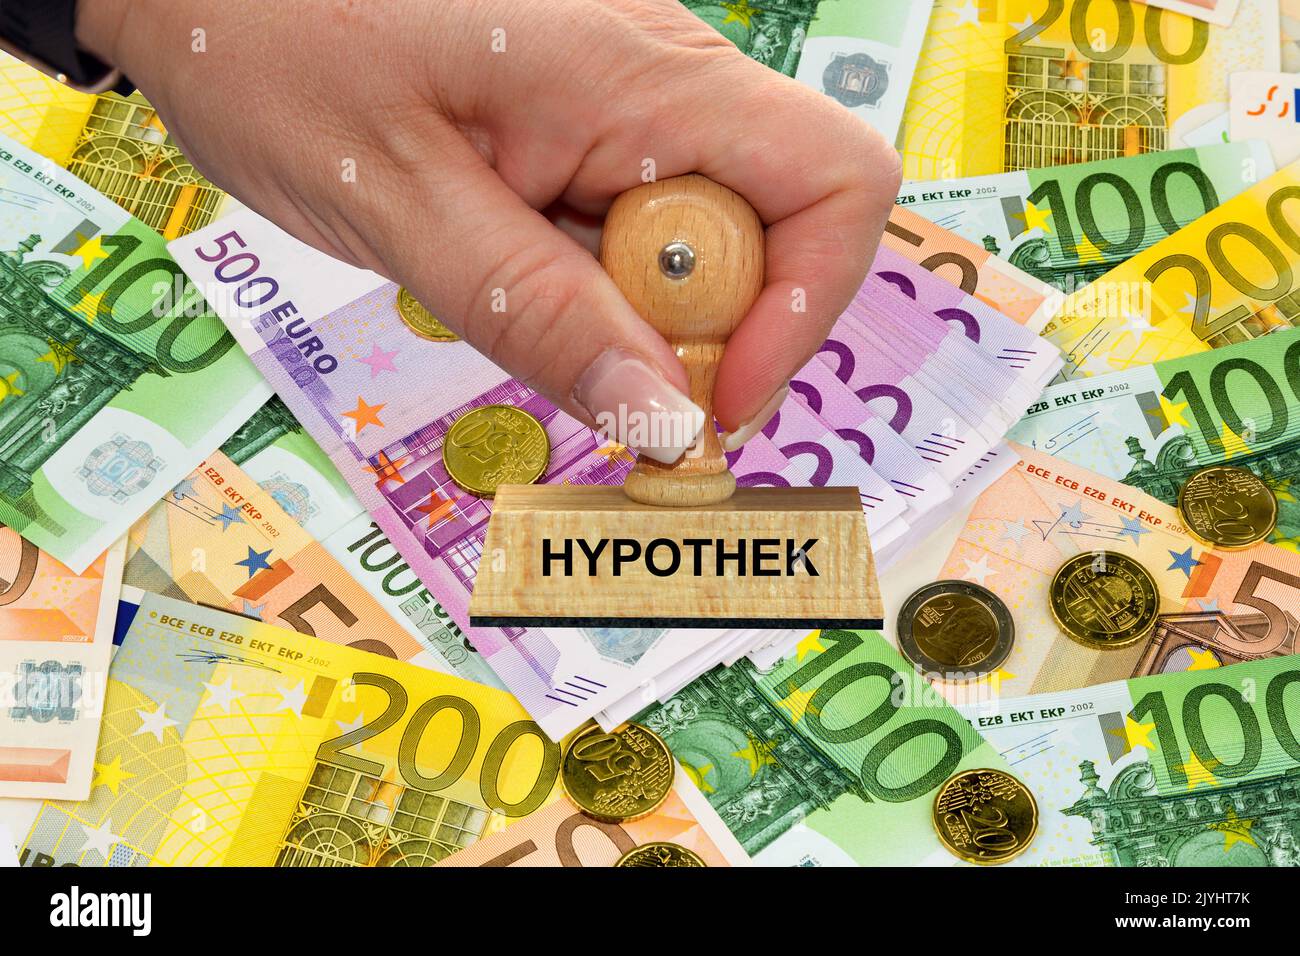 woman's hand with stamp lettering Hypothek, hypothec, Euros in the background, Germany Stock Photo